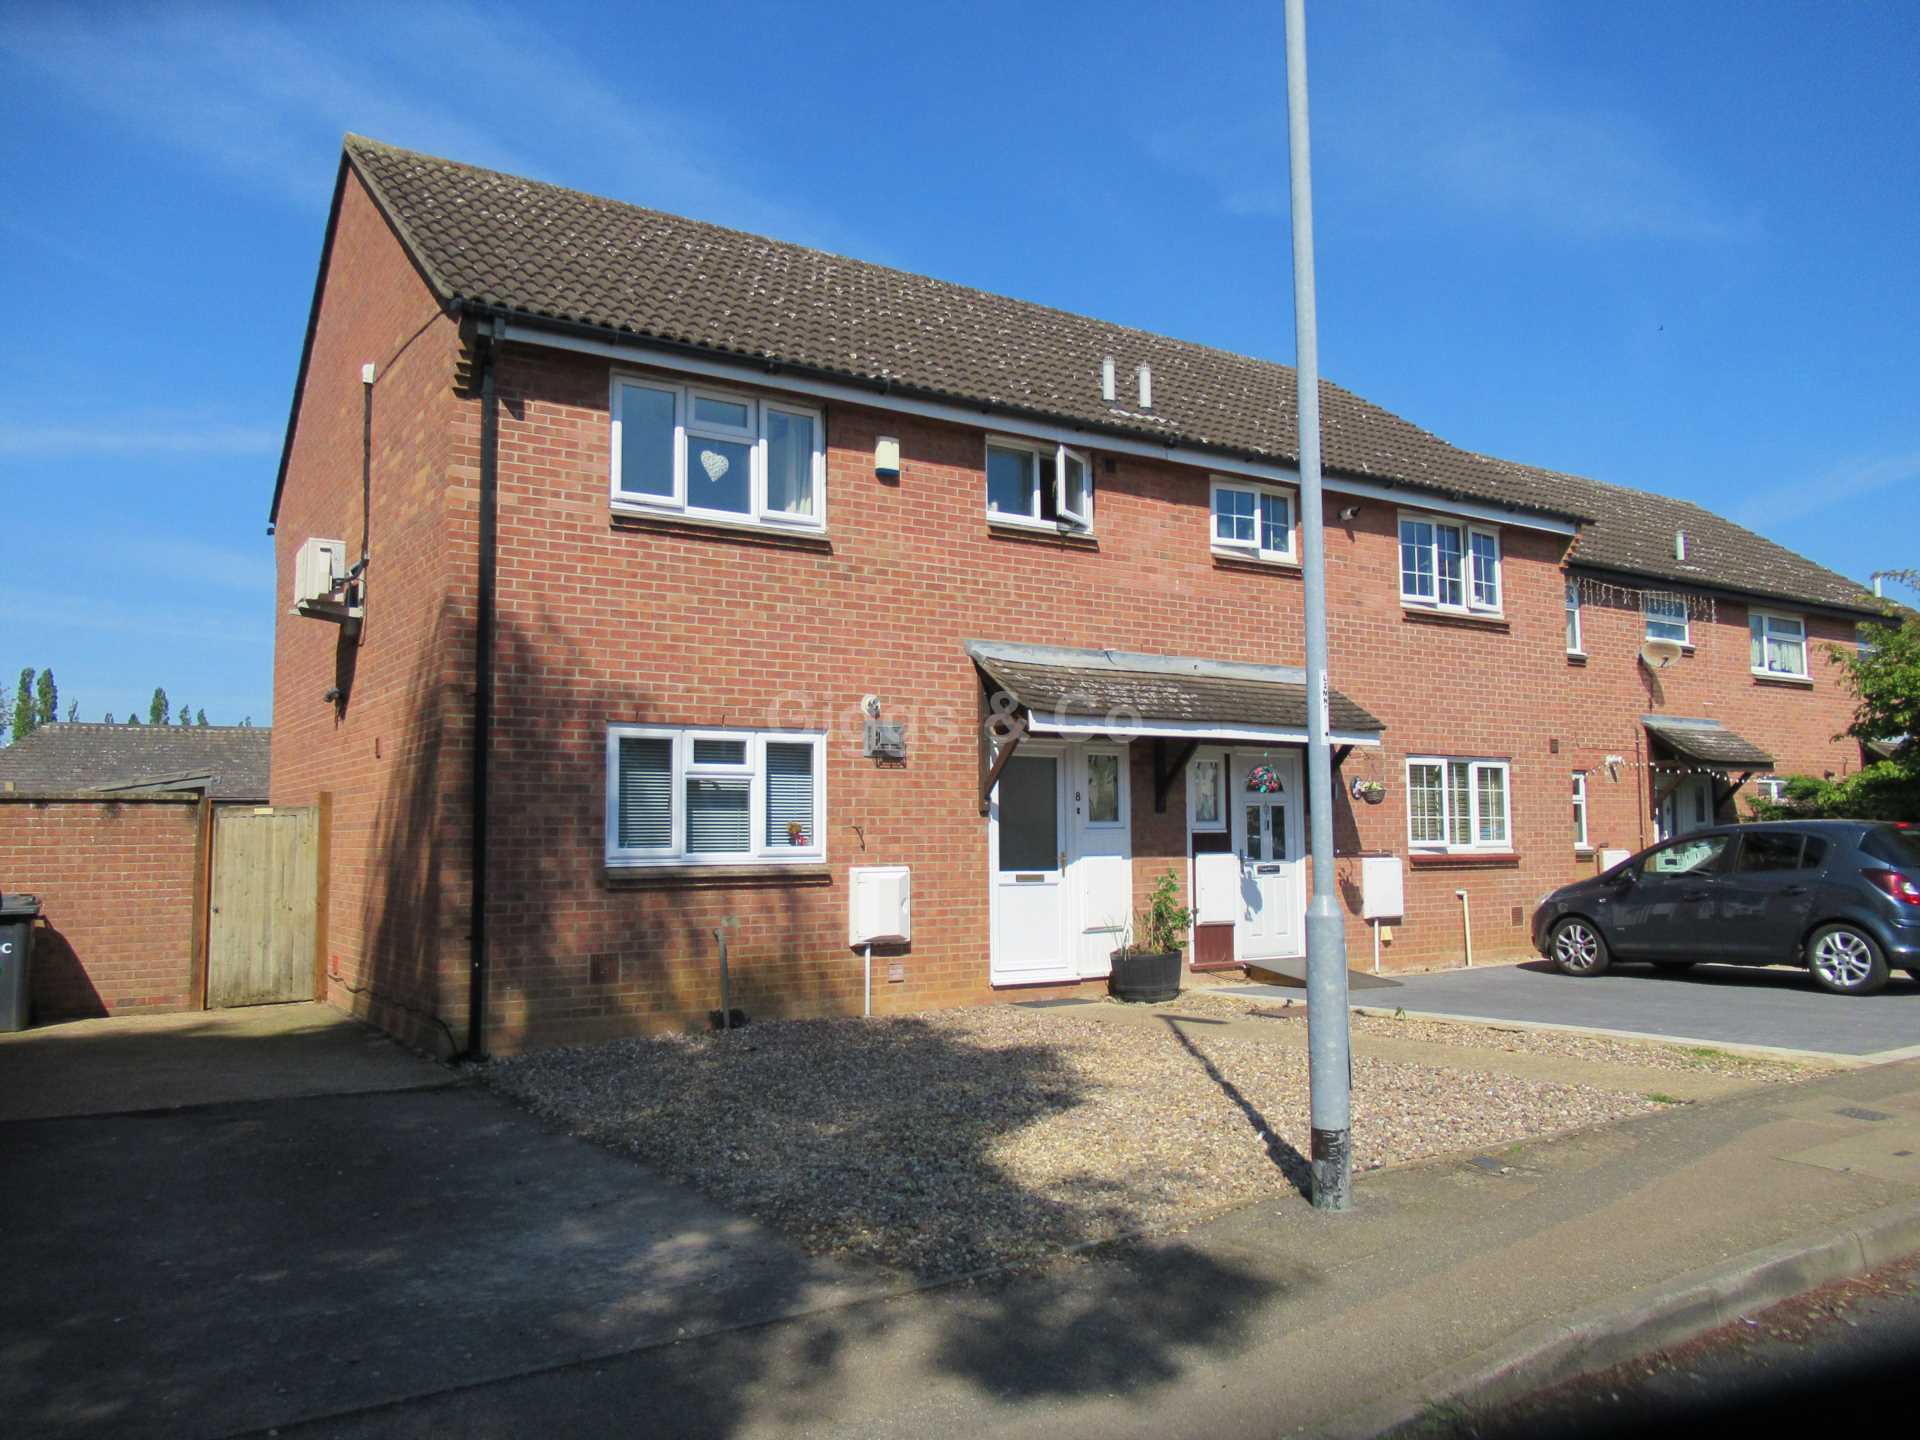 3 bed  to rent in Darrington Close, St Neots - Property Image 1